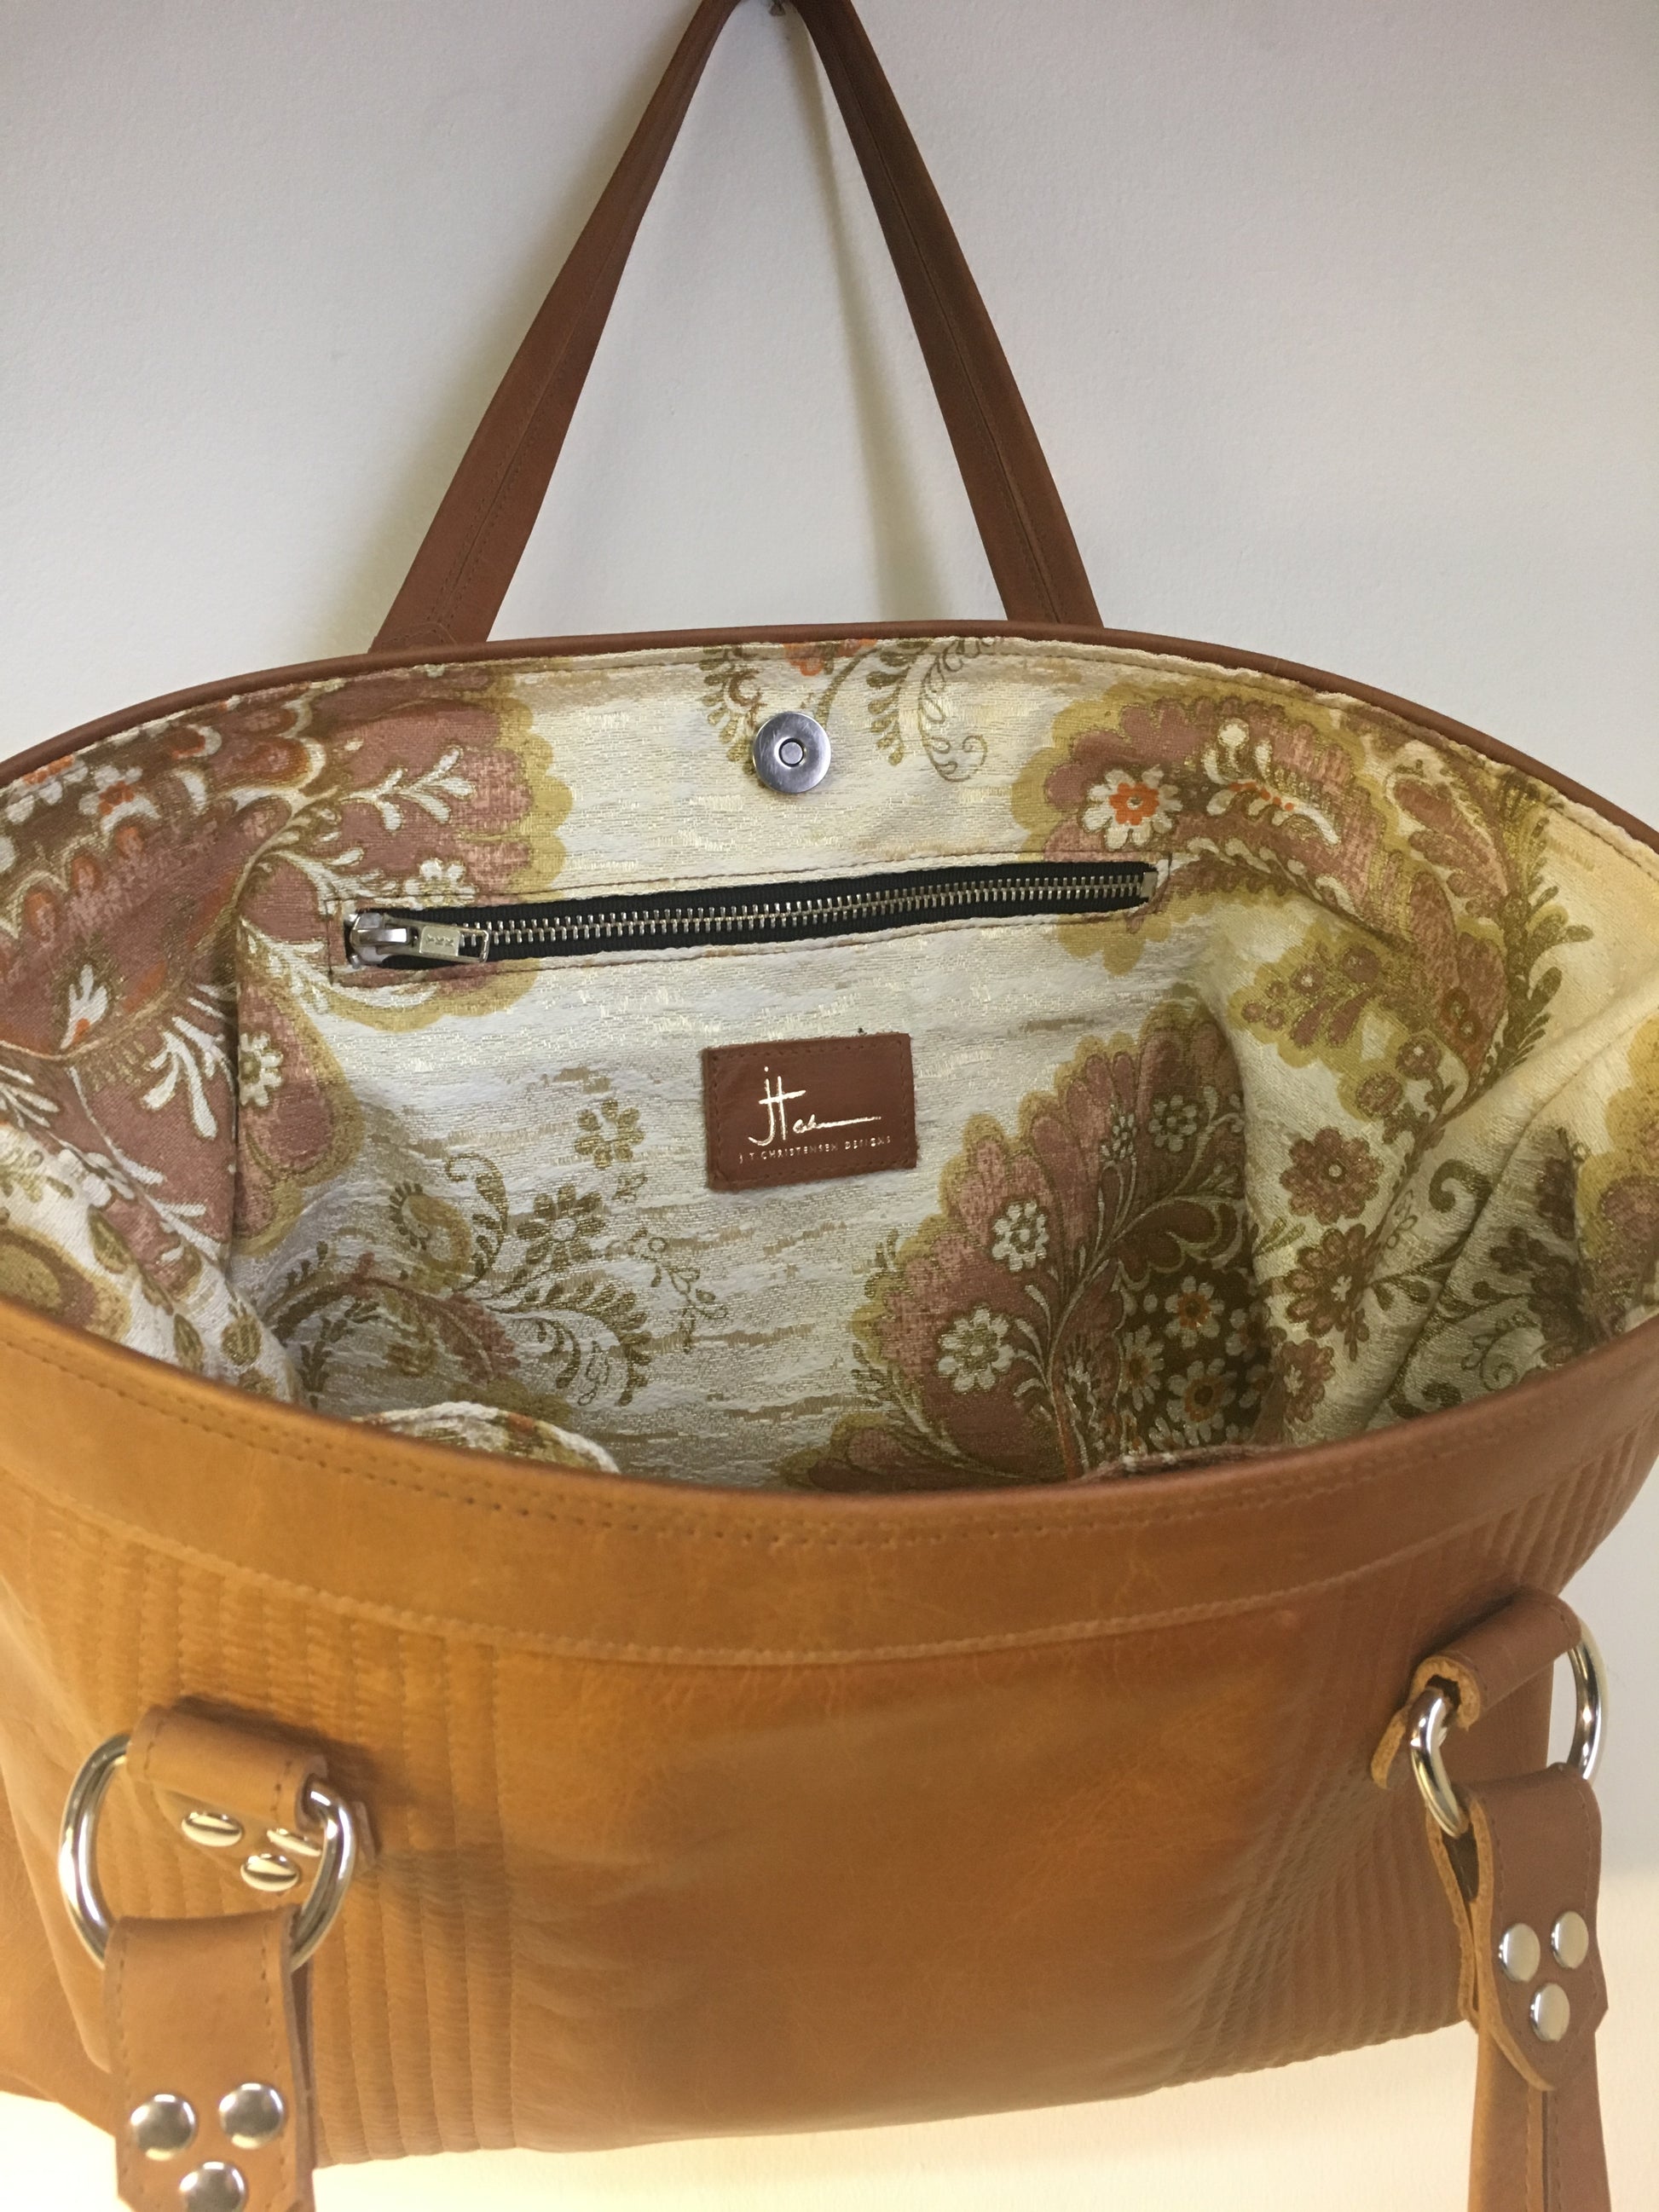 Open Tote with Mercury Style Pleating in Limited Edition Cognac Leather Lined with Re-Purposed 70’s Floral Fabric Lining. Measuring 15” across bottom (19” across top) x 10” x 5” (38 cm At Bottom / 48.25 cm At Top x 25.5 cm Tall x 12.5 cm Wide) and 24” (61cm) Straps. An open divided pocket and zipper pocket with hidden serial number and signature J.T. Christensen Label.